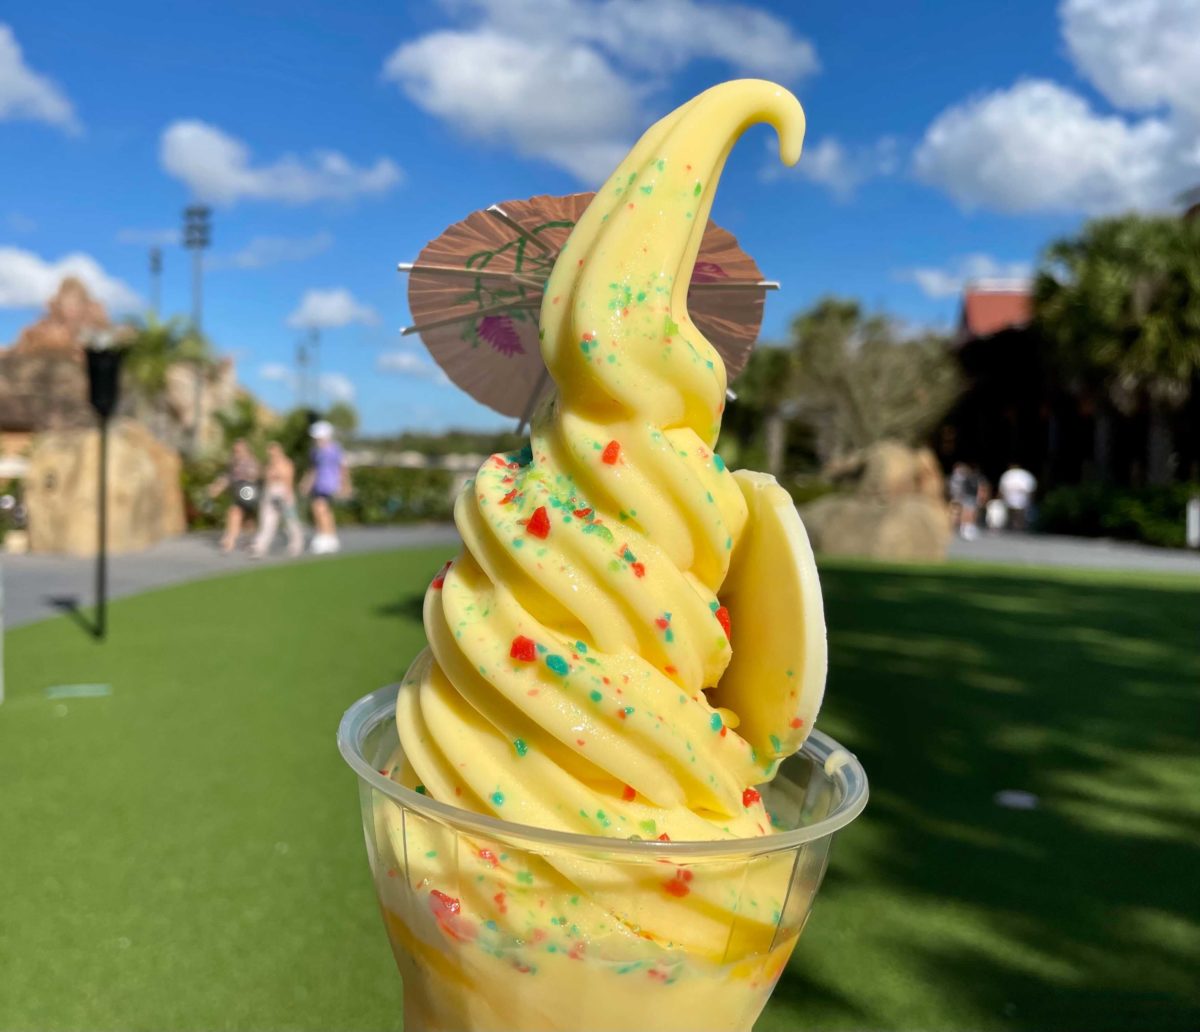 new-years-pineapple-dole-whip-float-3-3268672